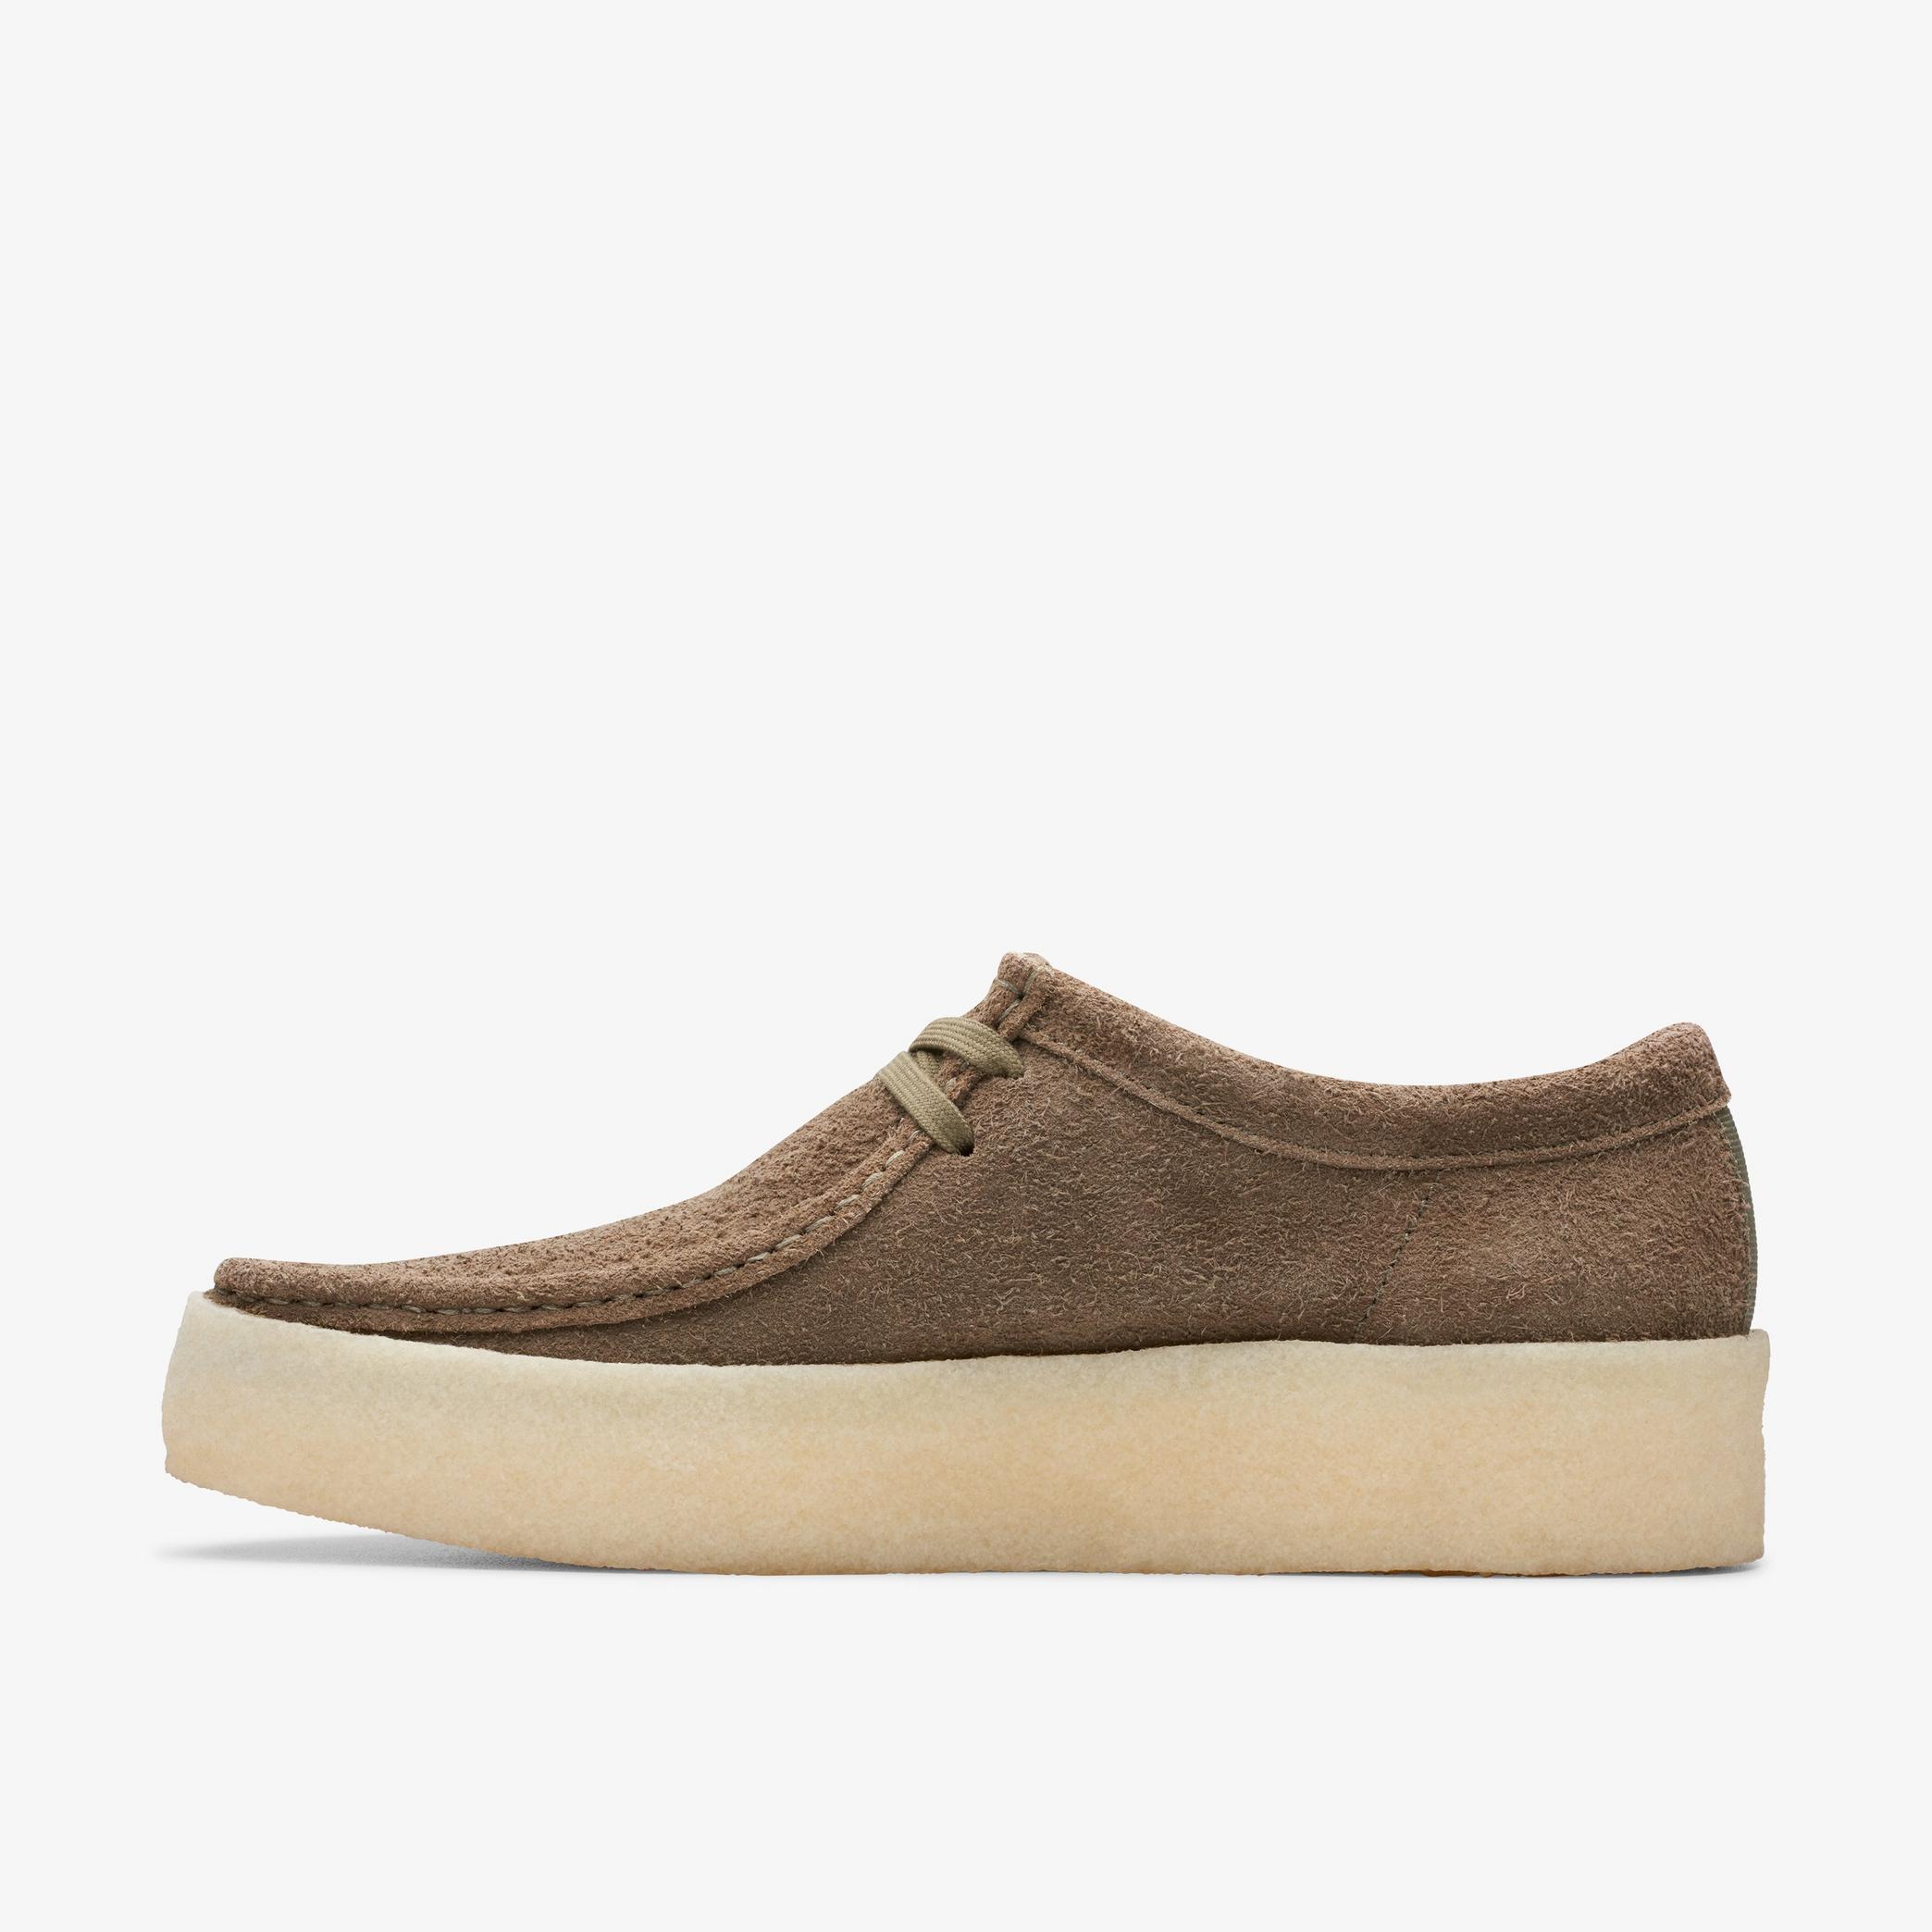 Wallabee Cup Pale Khaki Suede Wallabee, view 2 of 6